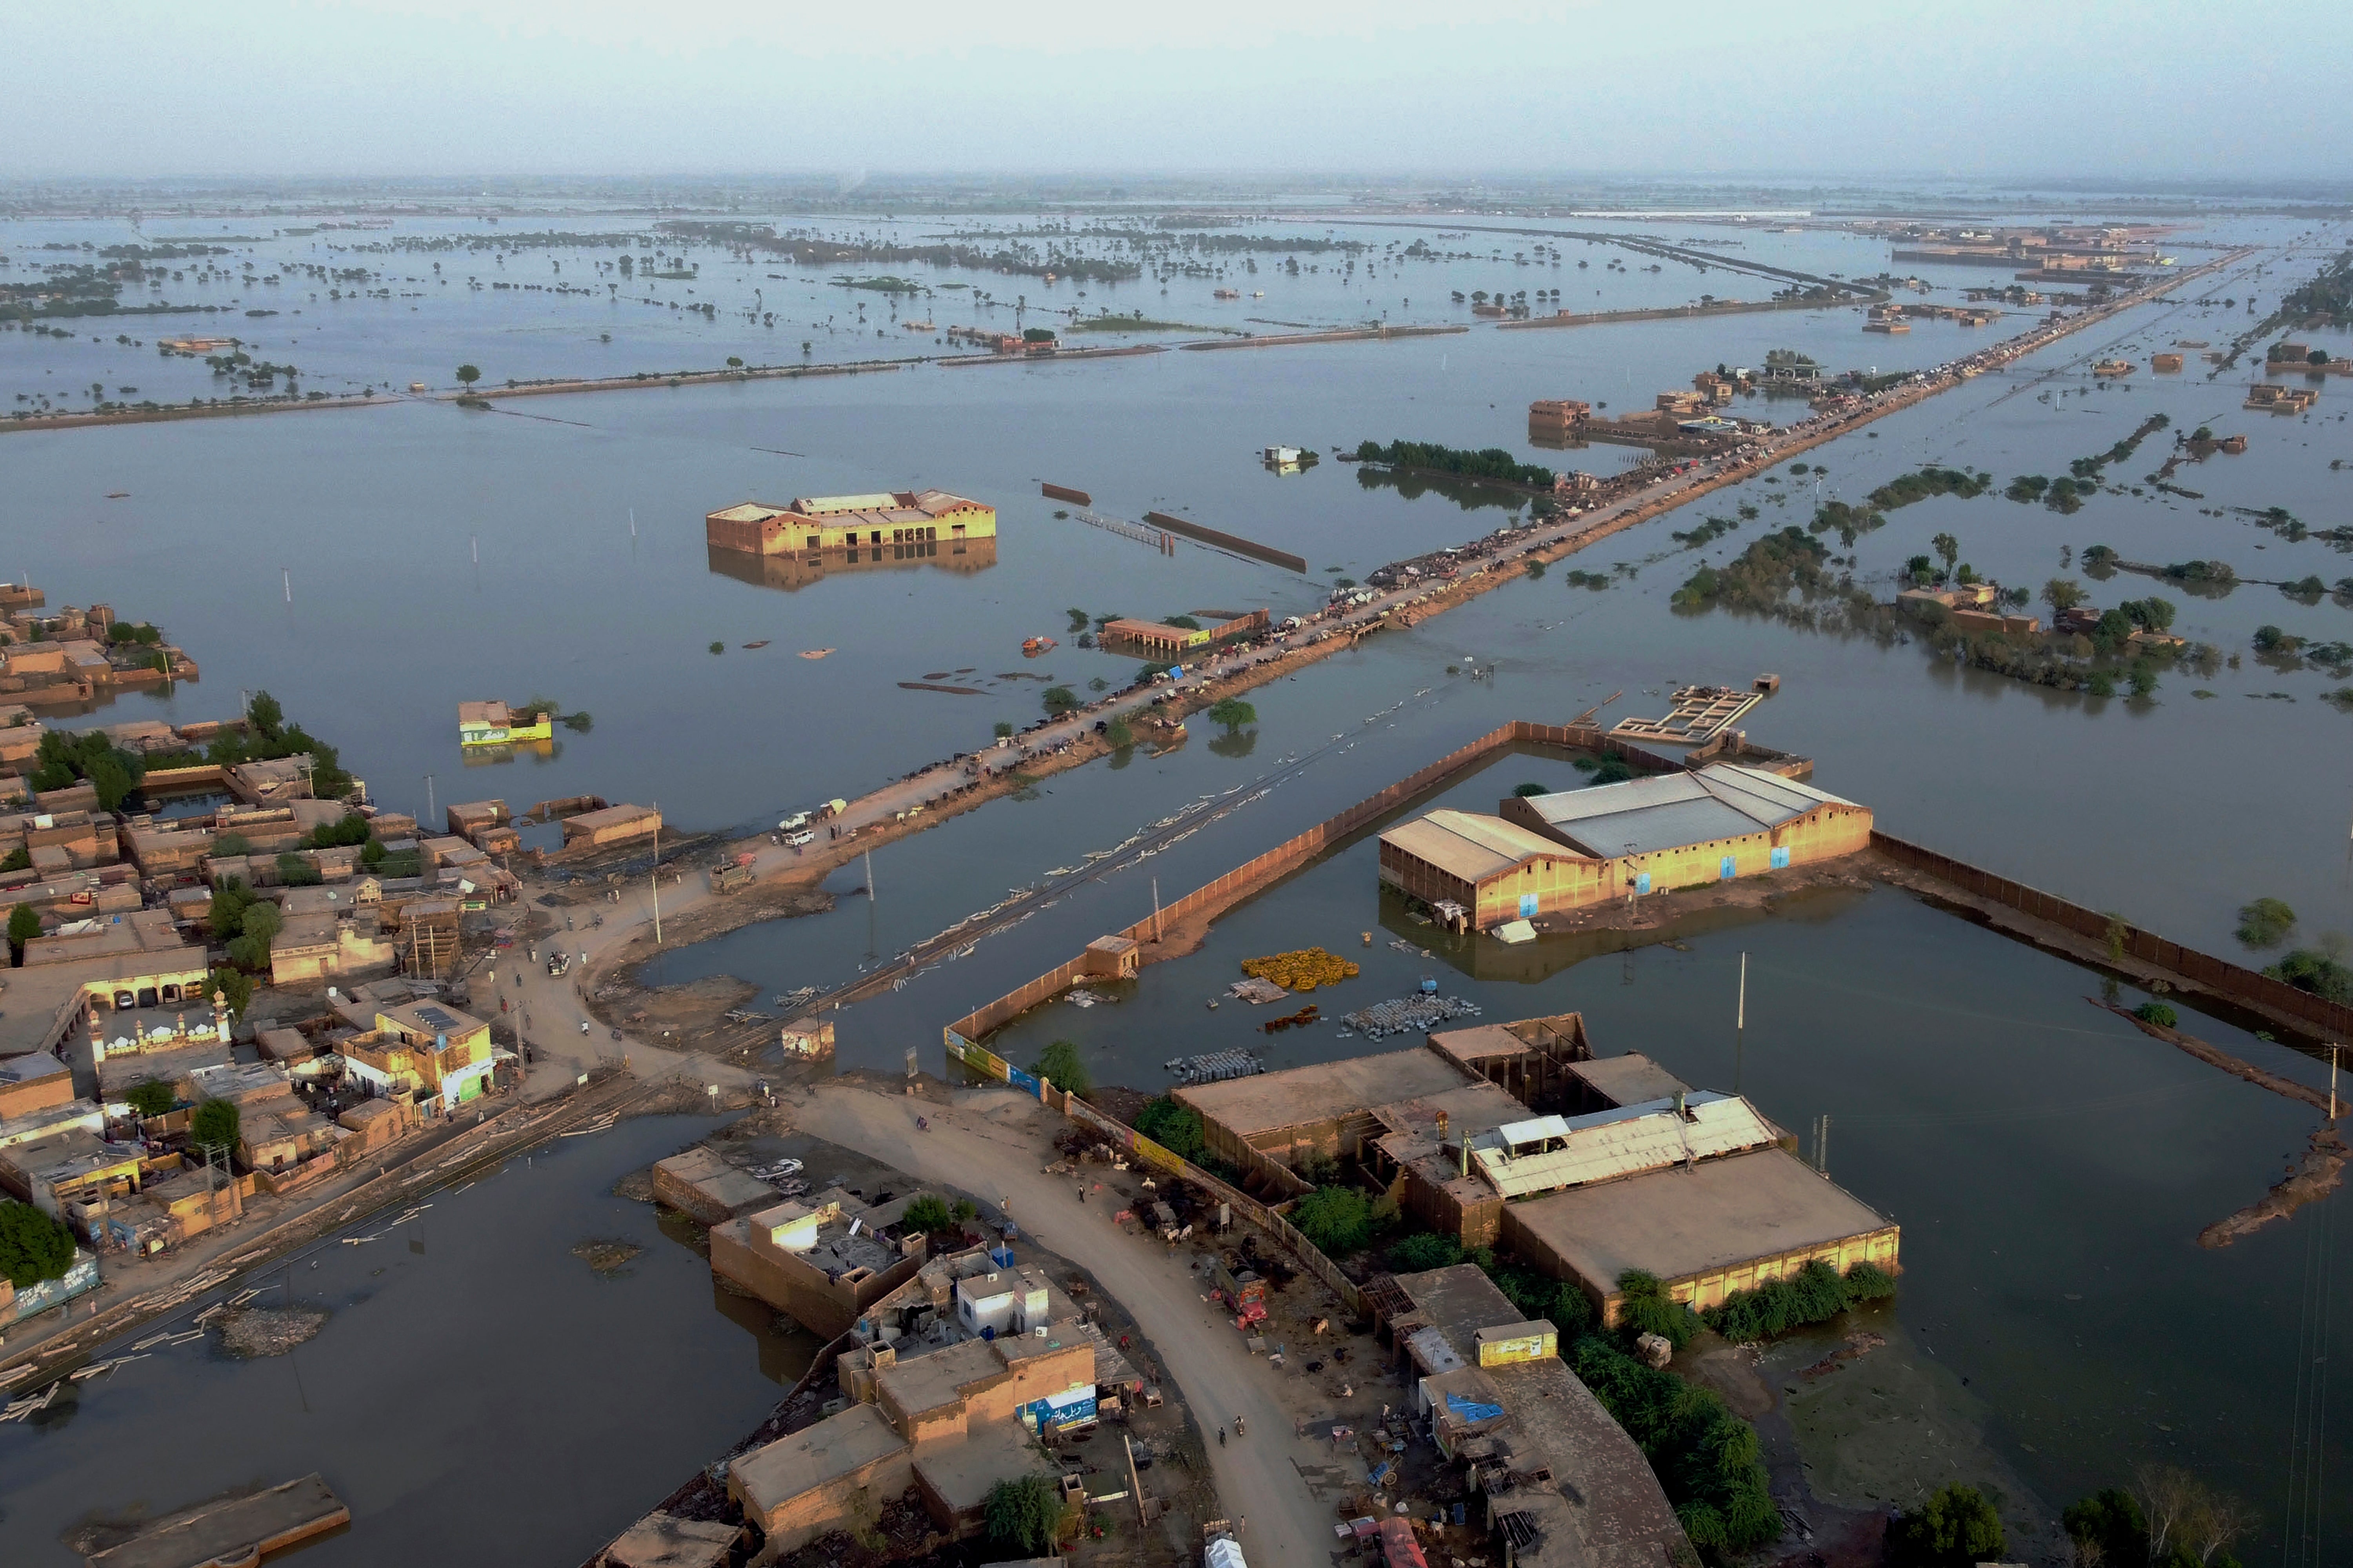 The August 2022 floods in Pakistan devastated large parts of the country